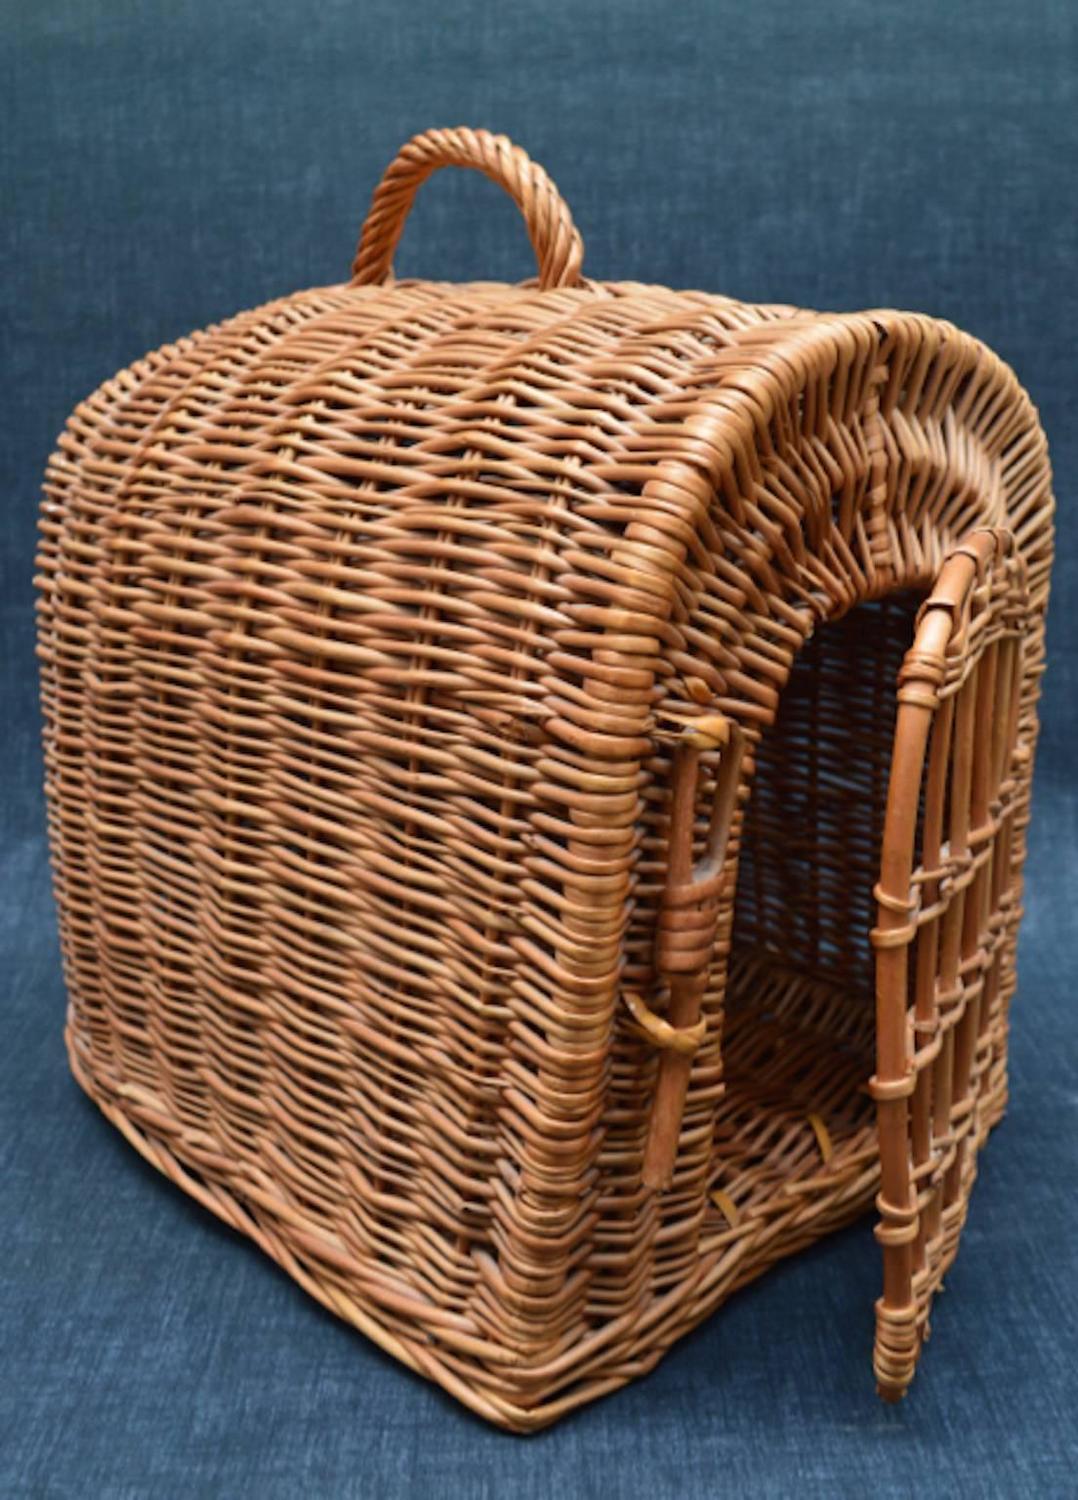 Vintage English Wicker Basket Pet-Carrier for a Cat or Small Dog For Sale at 1stdibs